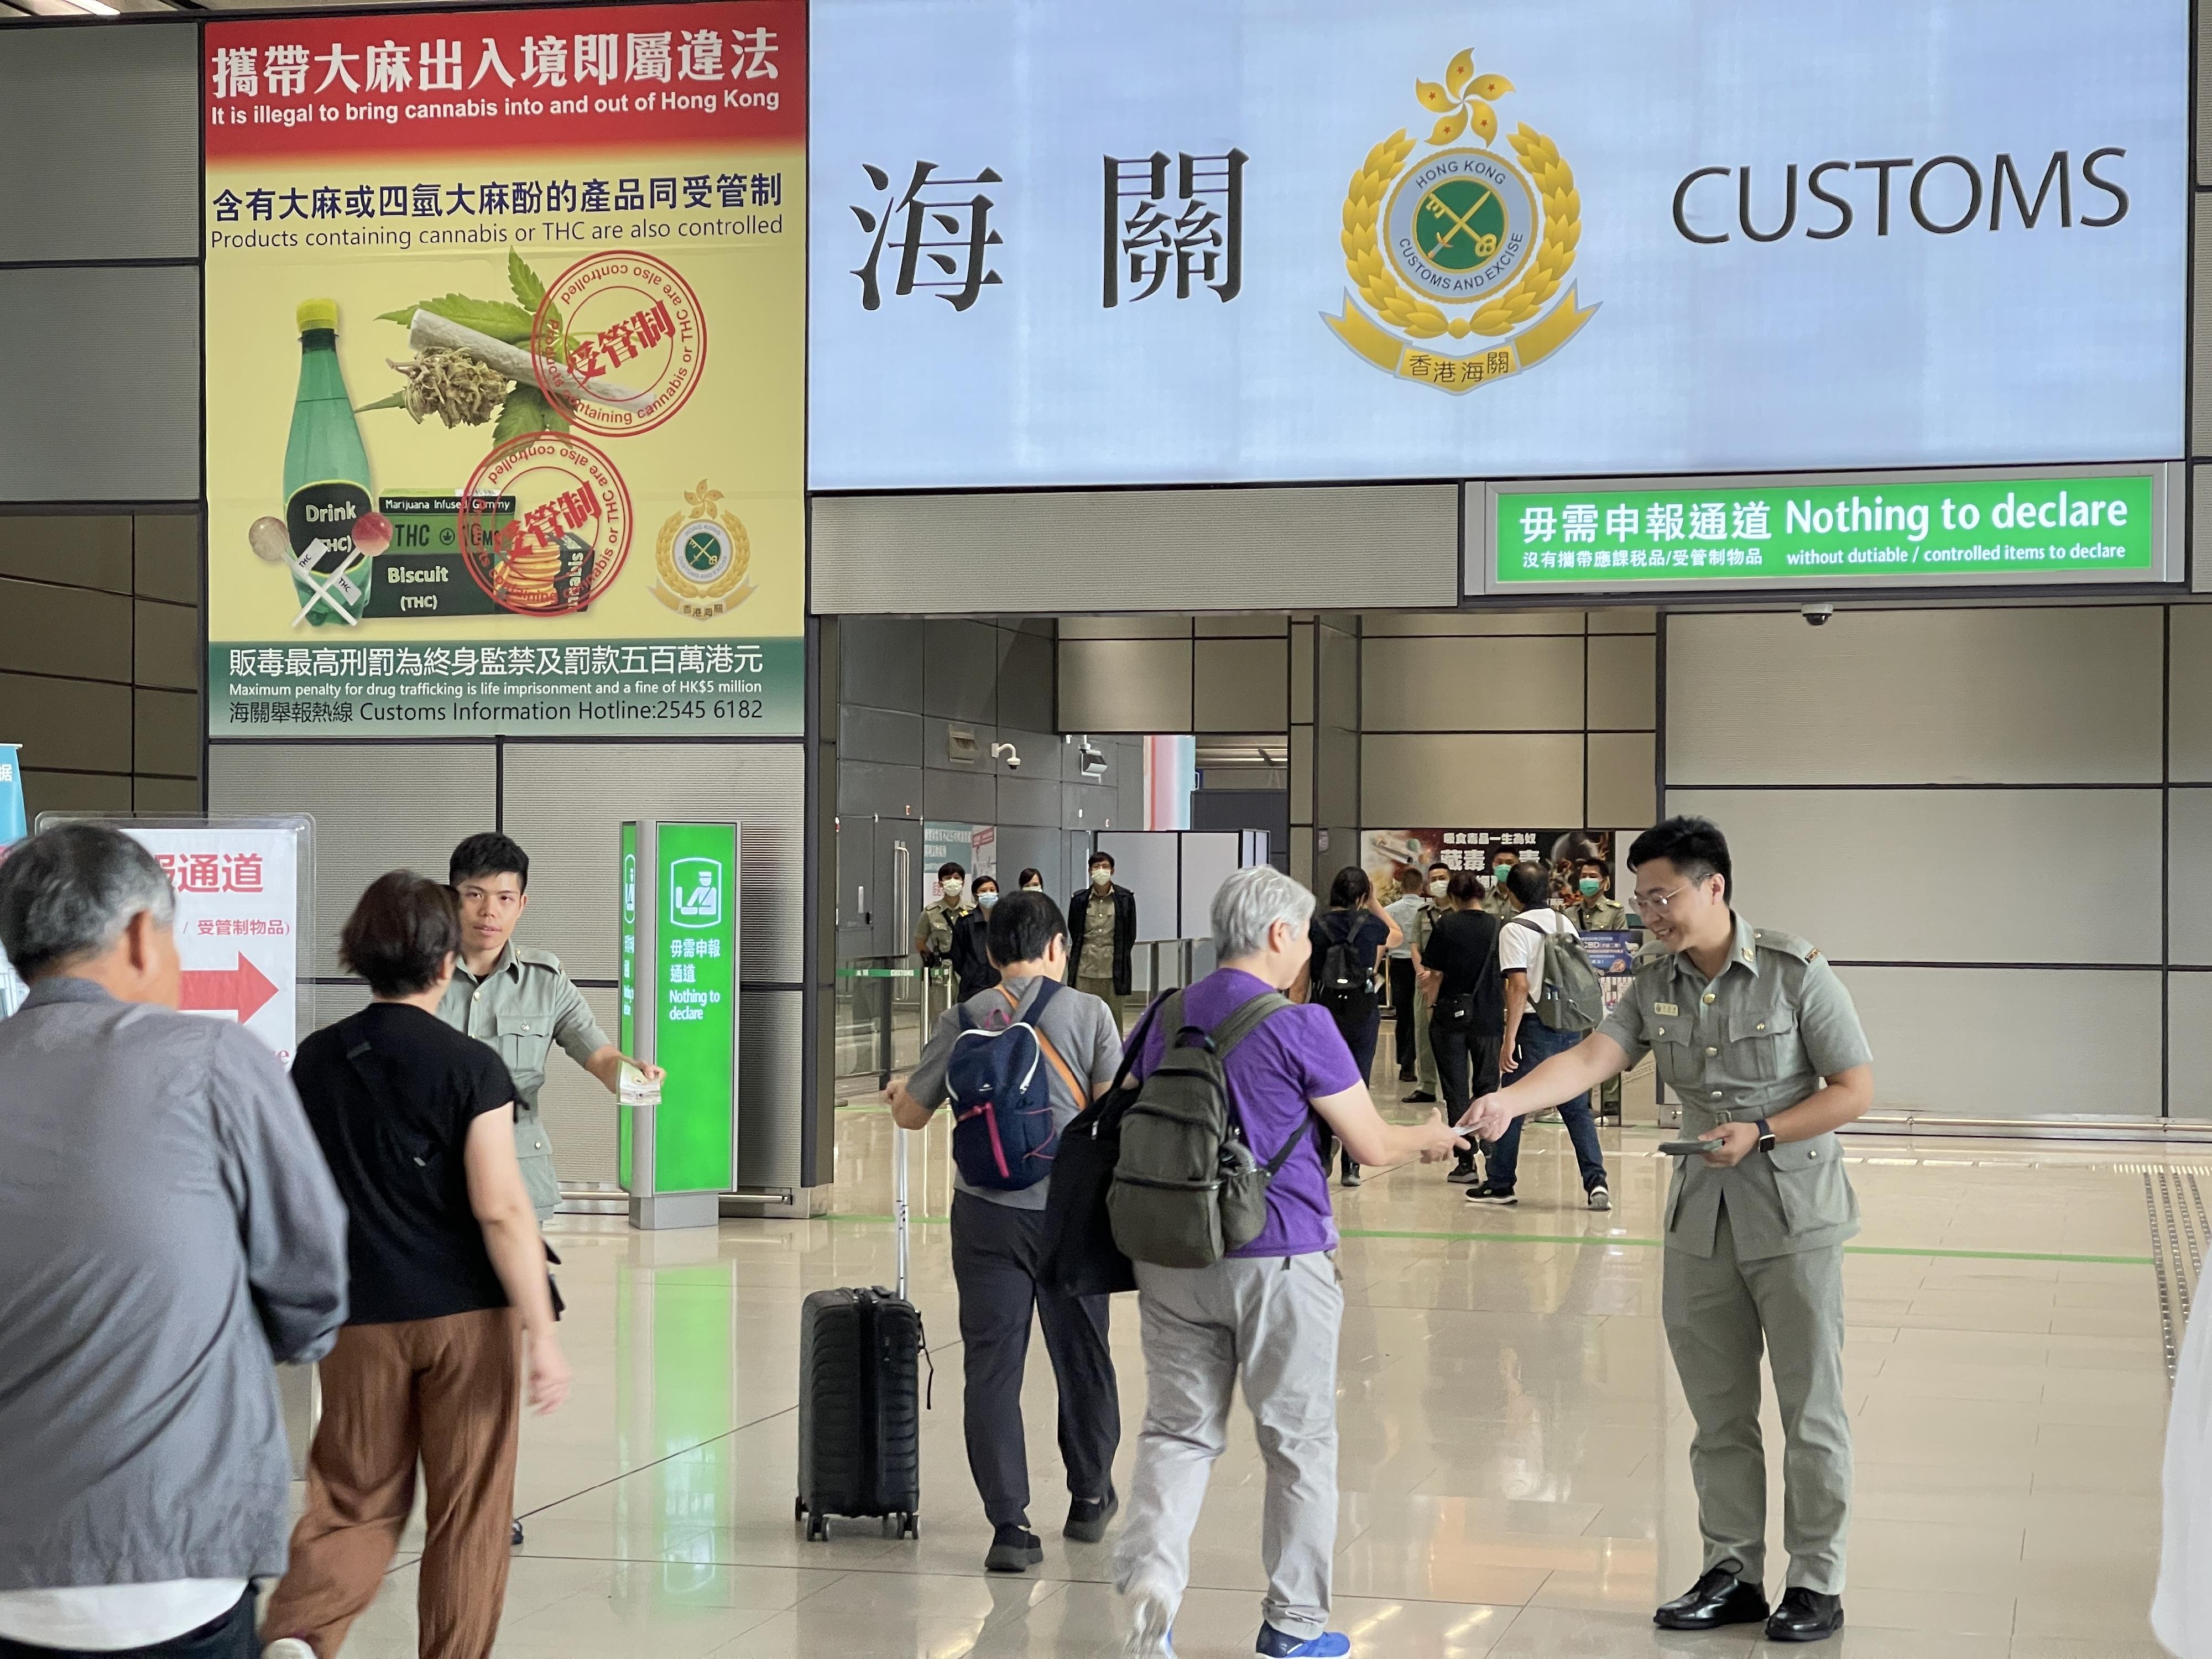 ​Hong Kong Customs has drawn up a series of measures to prepare for the arrival of Mainland visitors and cater for the commuting needs of Hong Kong citizens during the National Day Golden Week period to ensure smooth passenger, vehicular and goods flows at each control point. Photo shows Customs officers distributing pamphlets of Smart Guide to Passenger Clearance to remind visitors not to carry prohibited and controlled articles in and out of Hong Kong at boundary control points.